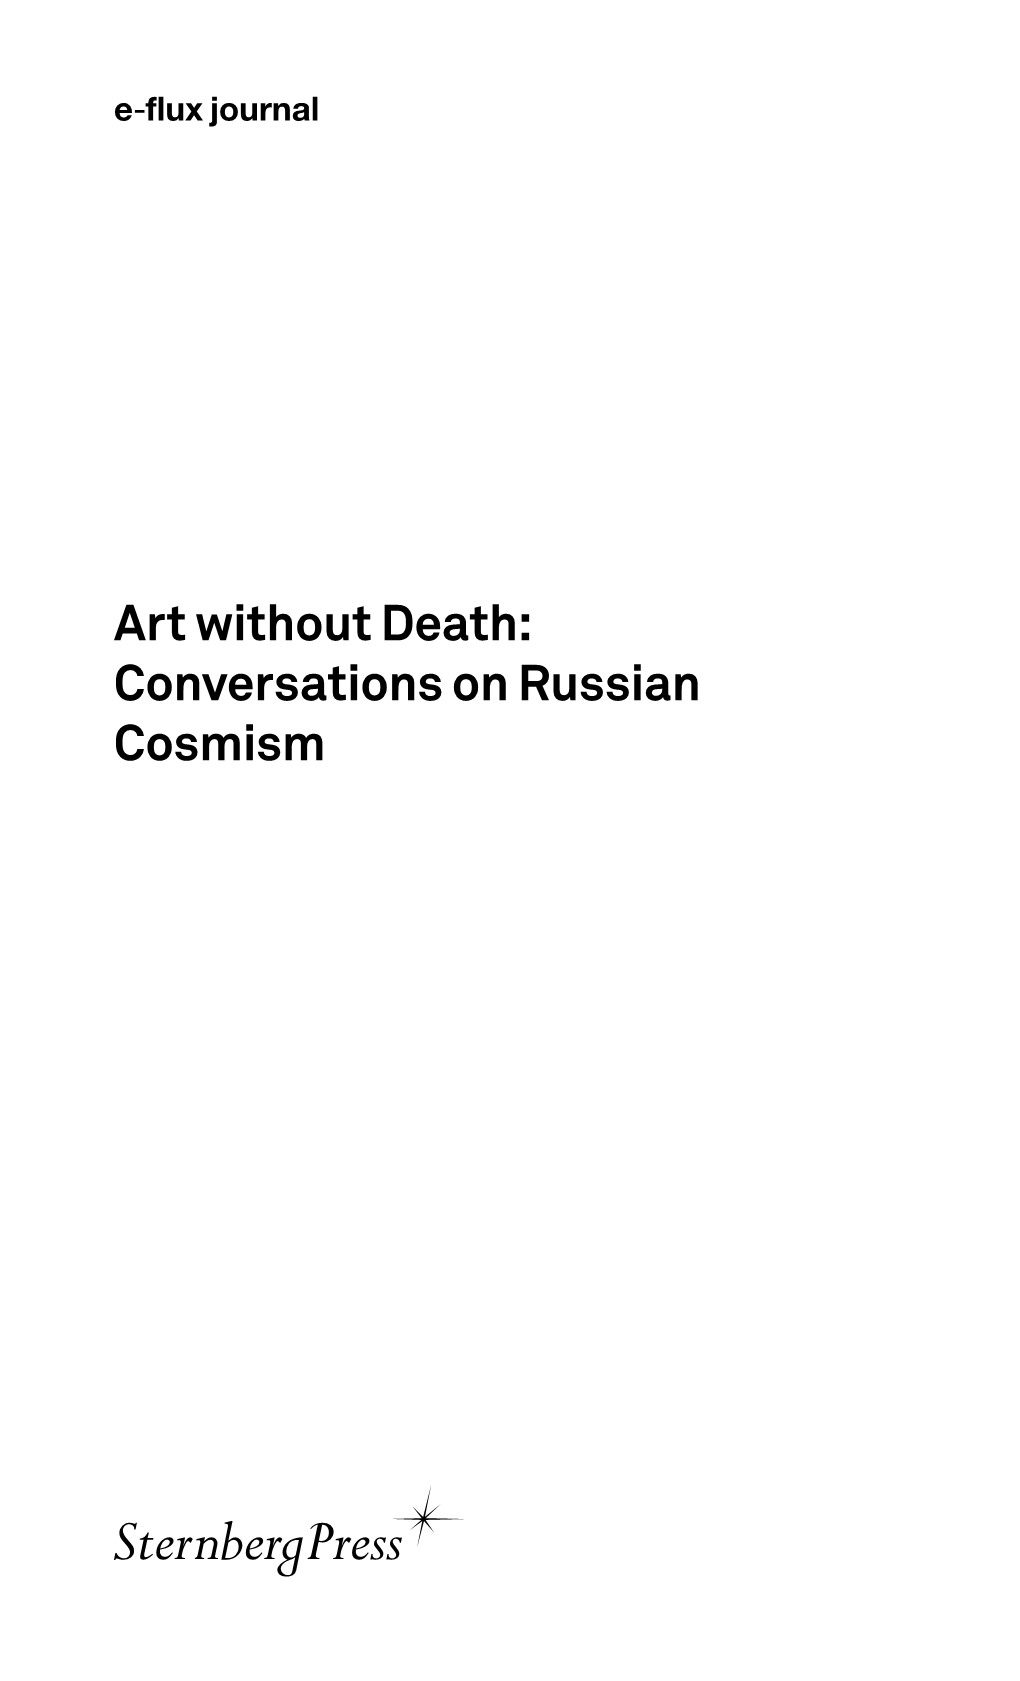 Art Without Death: Conversations on Russian Cosmism Contents